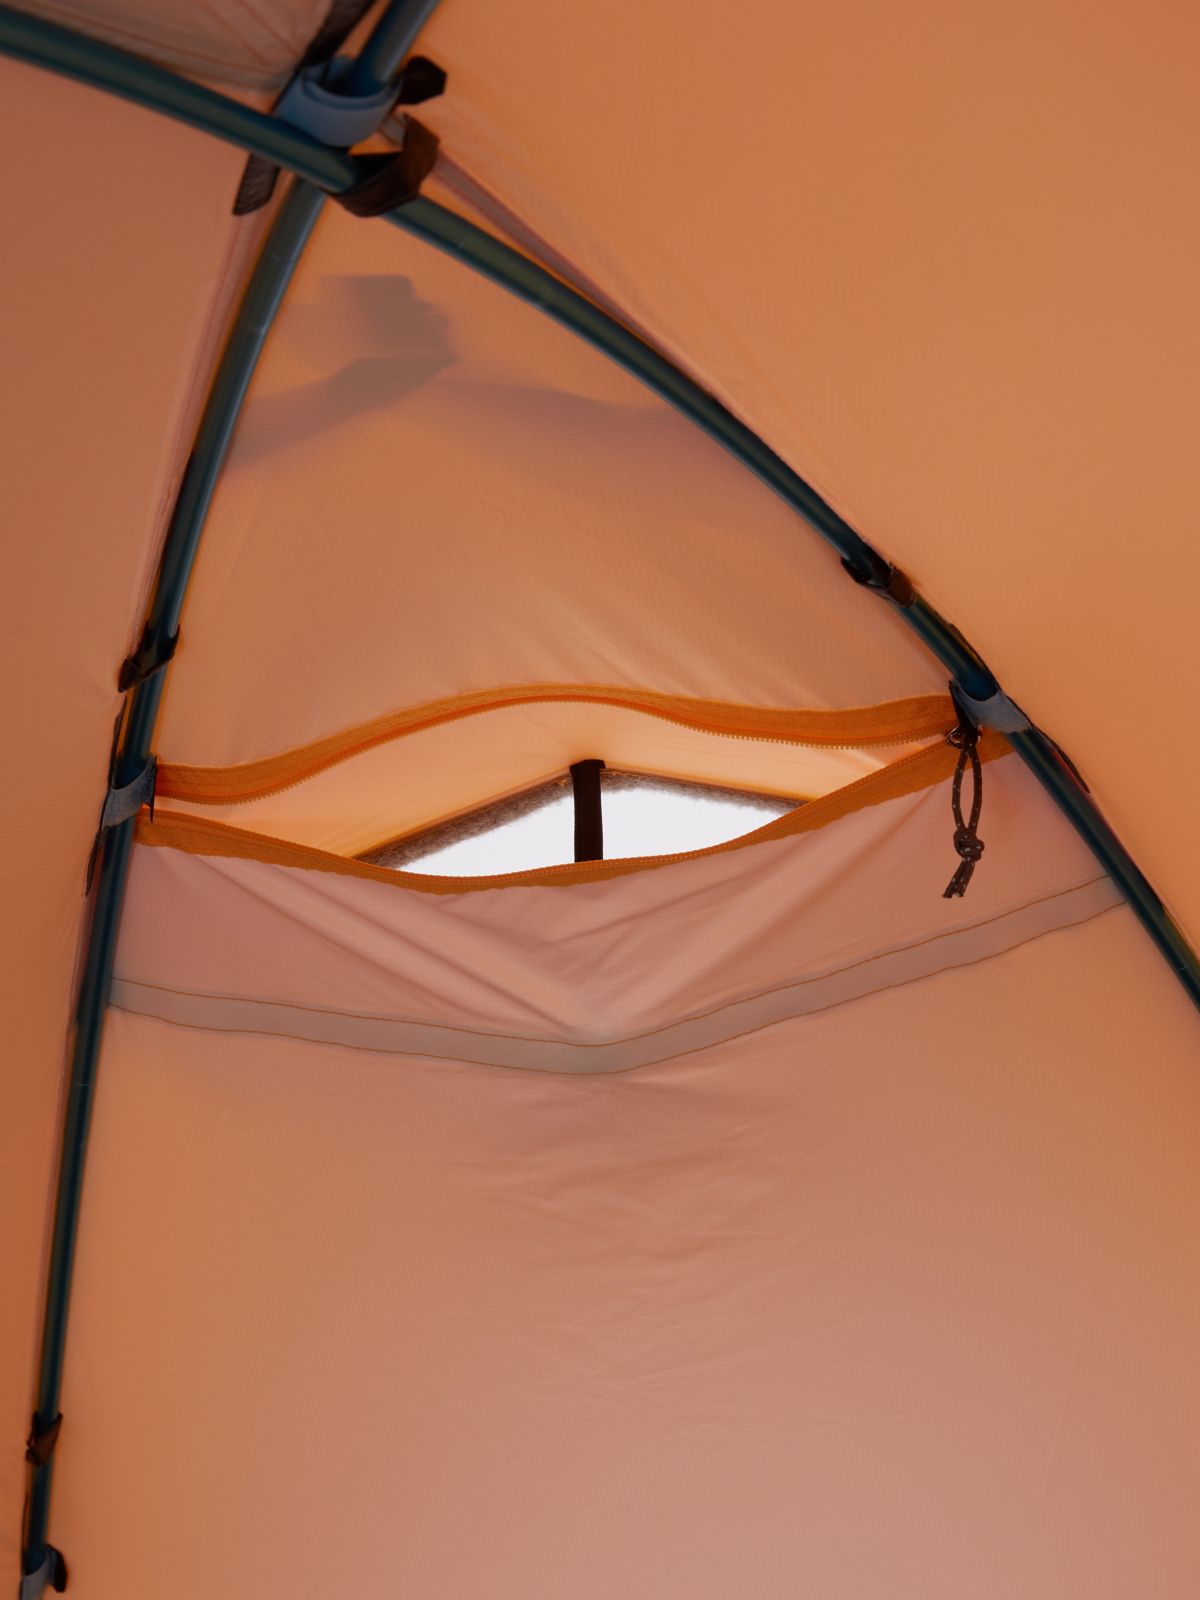 Hammer 2-Person Tent